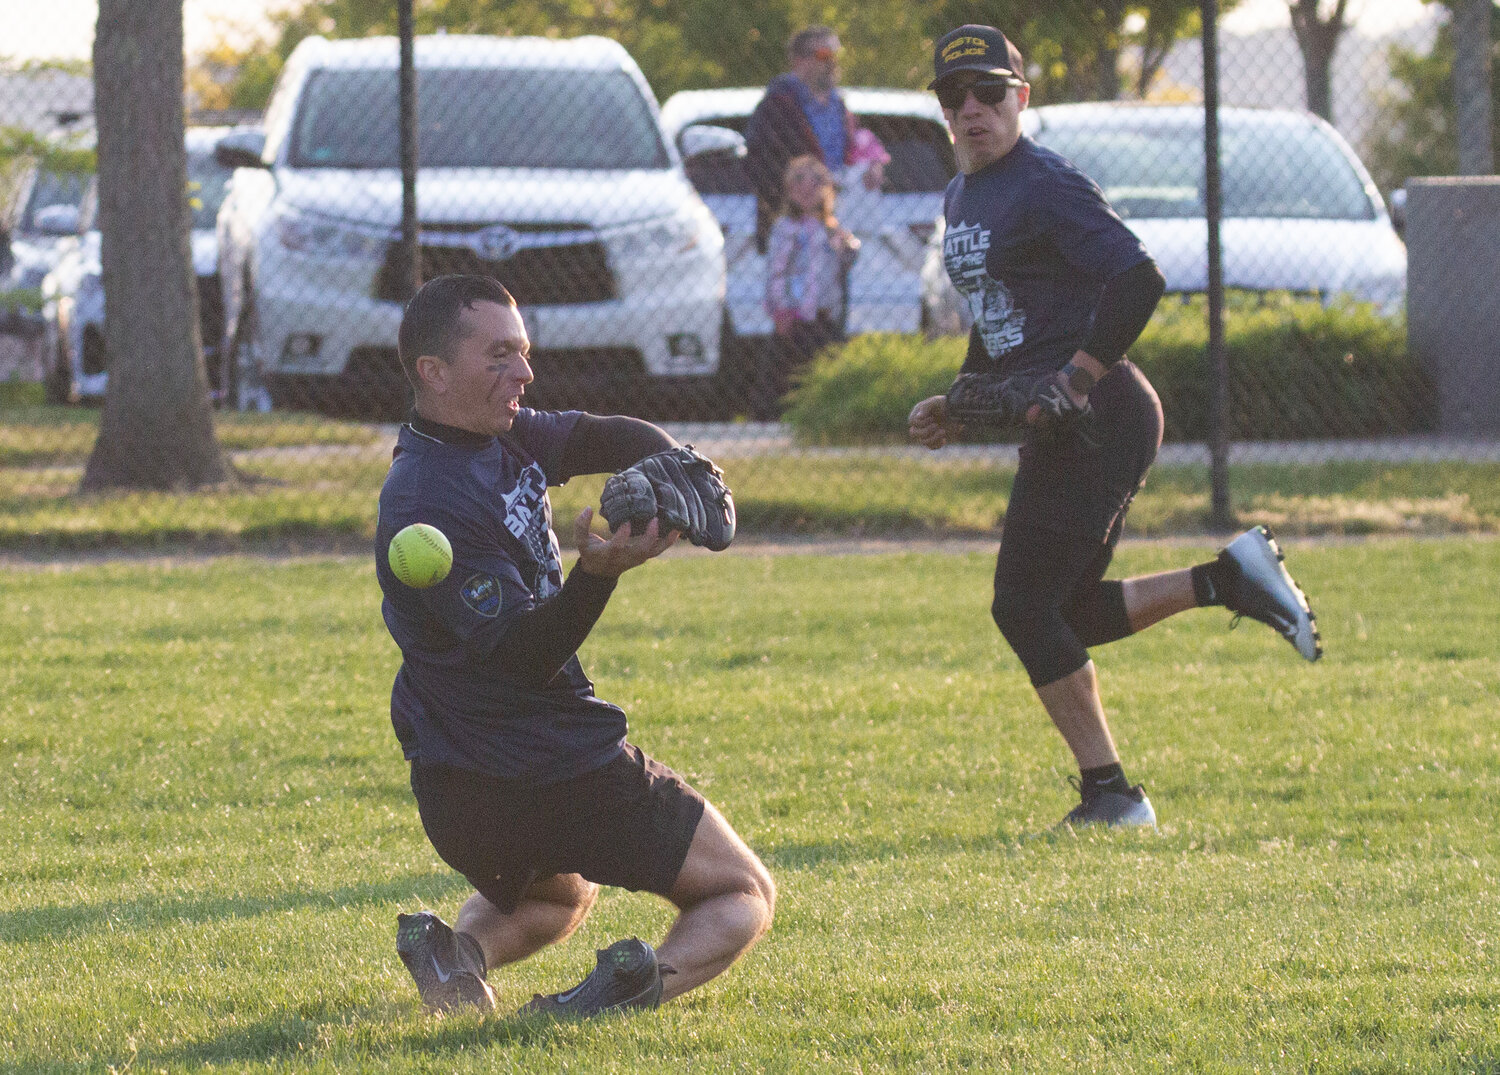 Tyler Carreiro (left) attempts to catch a fly ball while another officer backs up the play.